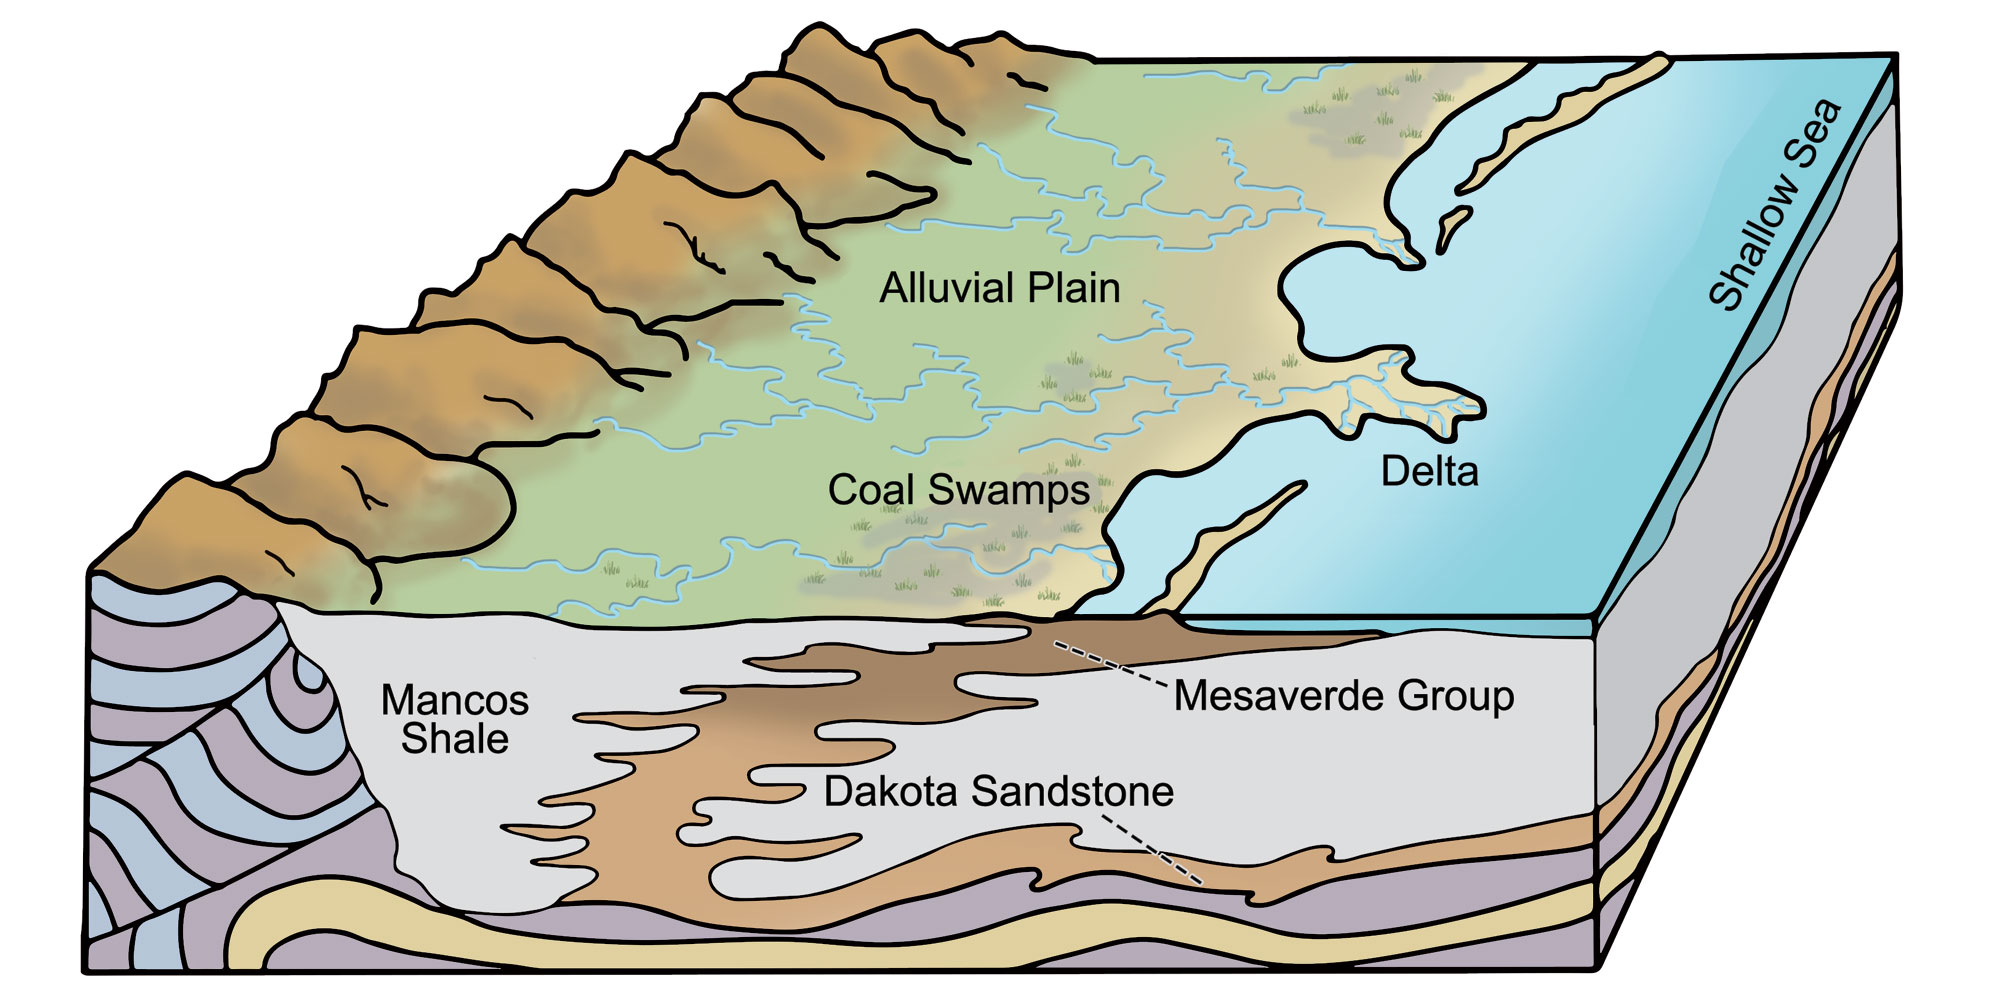 Diagram showing Cretaceous coal swamps in which Cretaceous coals accumulated. The cutaway view shows the Mancos Shale, The Dakota Sandstone, and the Mesaverde Group making up the subsurface. On the surface, mountains are on the left and a shallow sea on the right, with an alluvial plain between them. Coal swamps occur near the edge of the sea. A delta is shown extending into the sea.